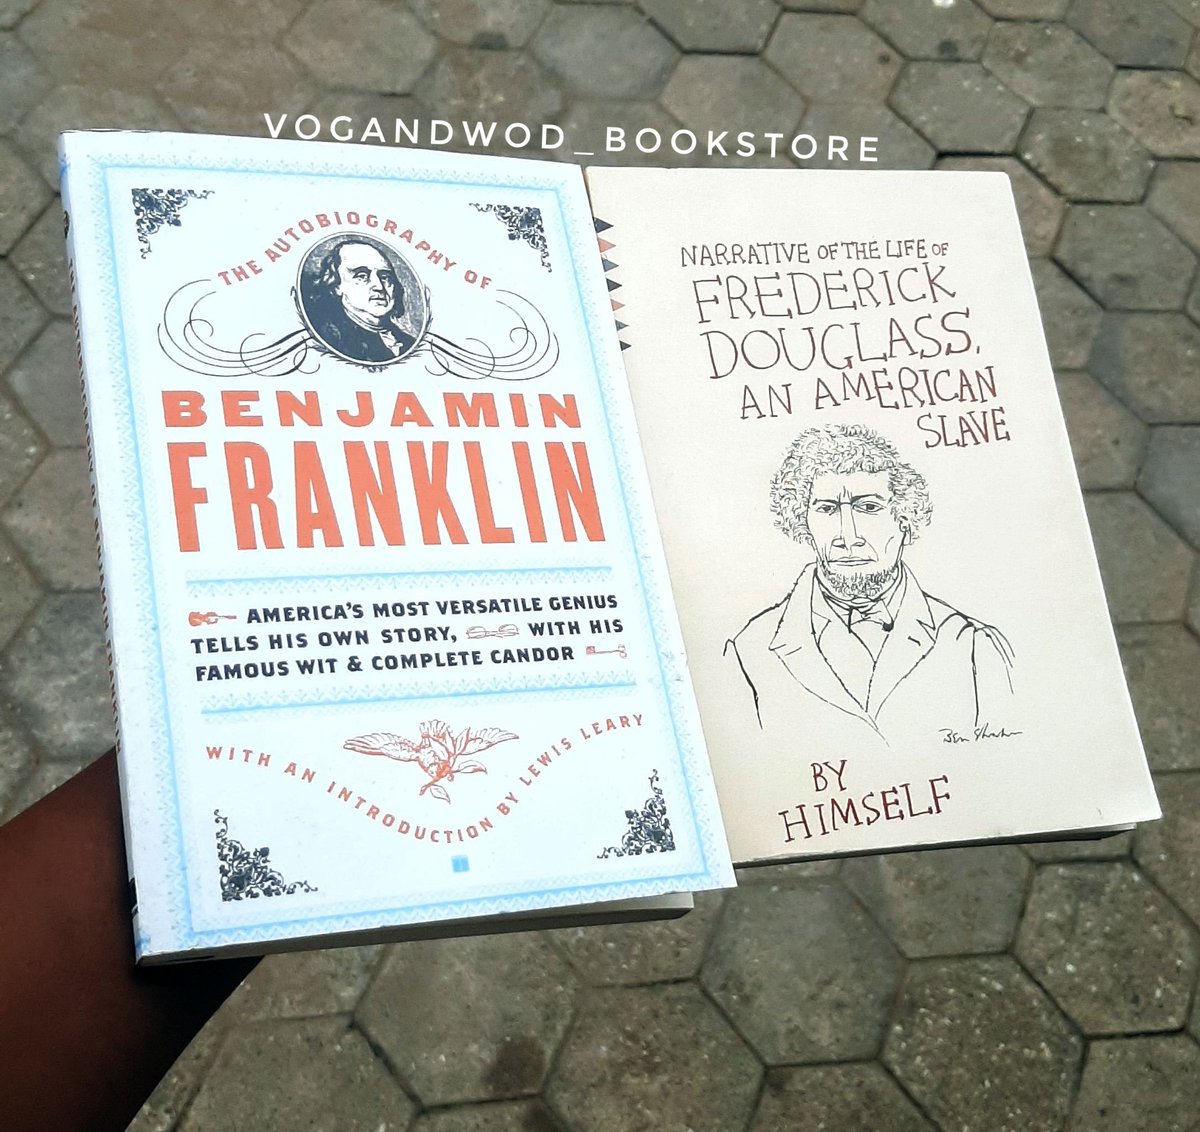 The autobiography of Benjamin Franklin The Autobiography of Benjamin Franklin is the traditional name for the unfinished record of his own life written by Benjamin Franklin from 1771 to 1790; however, Franklin himself appears to have called the work his Memoirs.